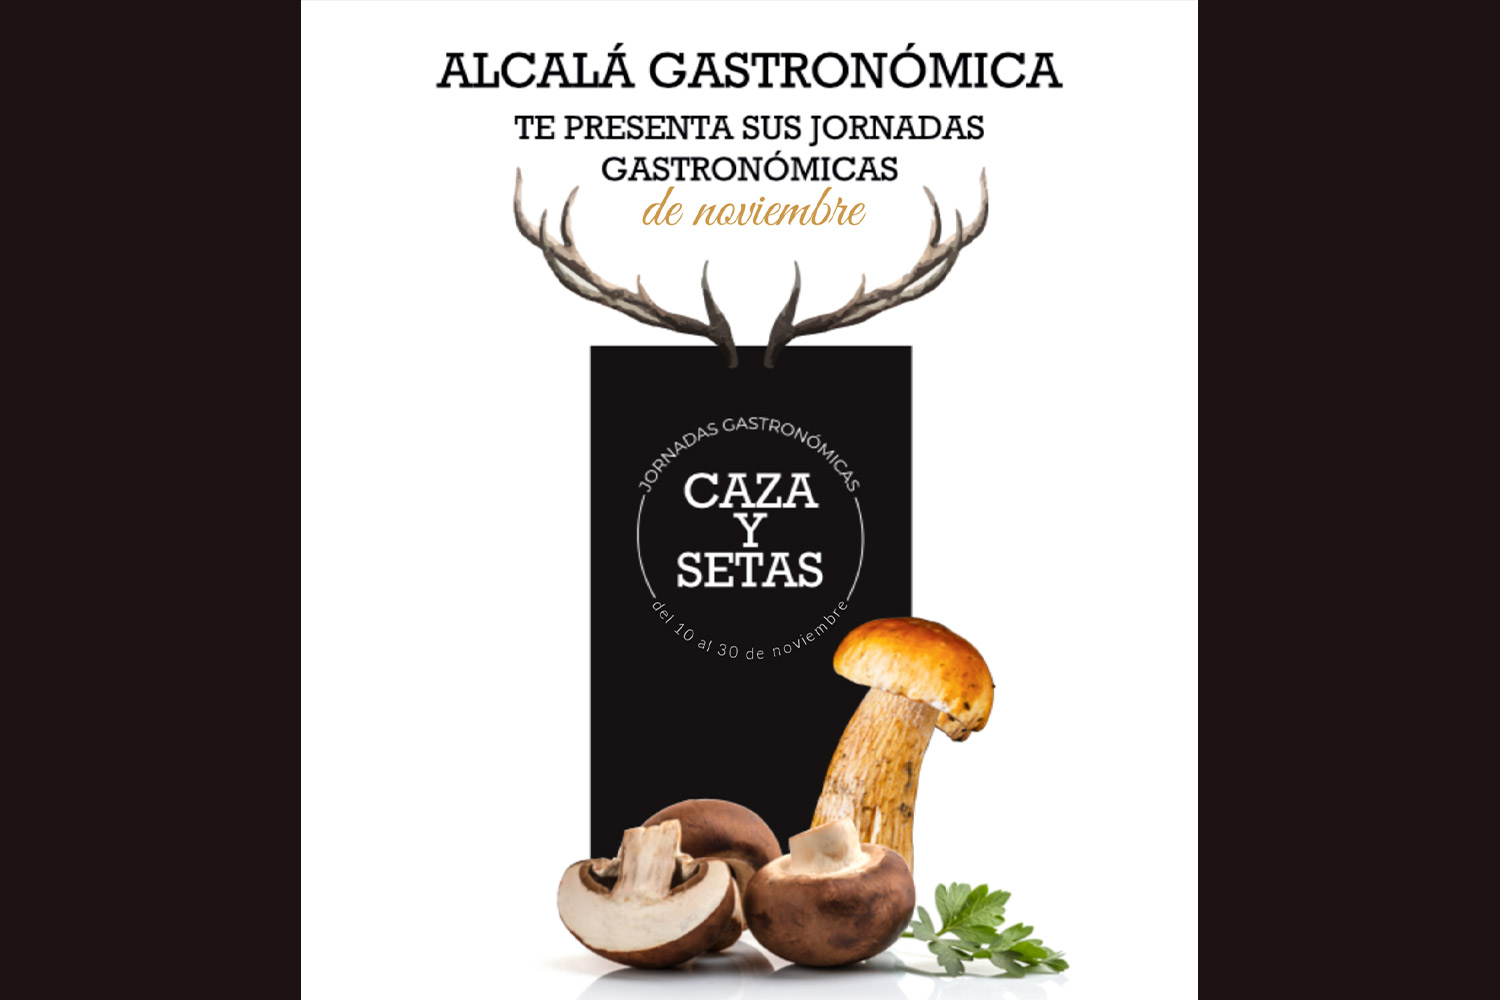 Gastronomic Days "Hunting and Mushrooms" in Alcalá de Henares poster